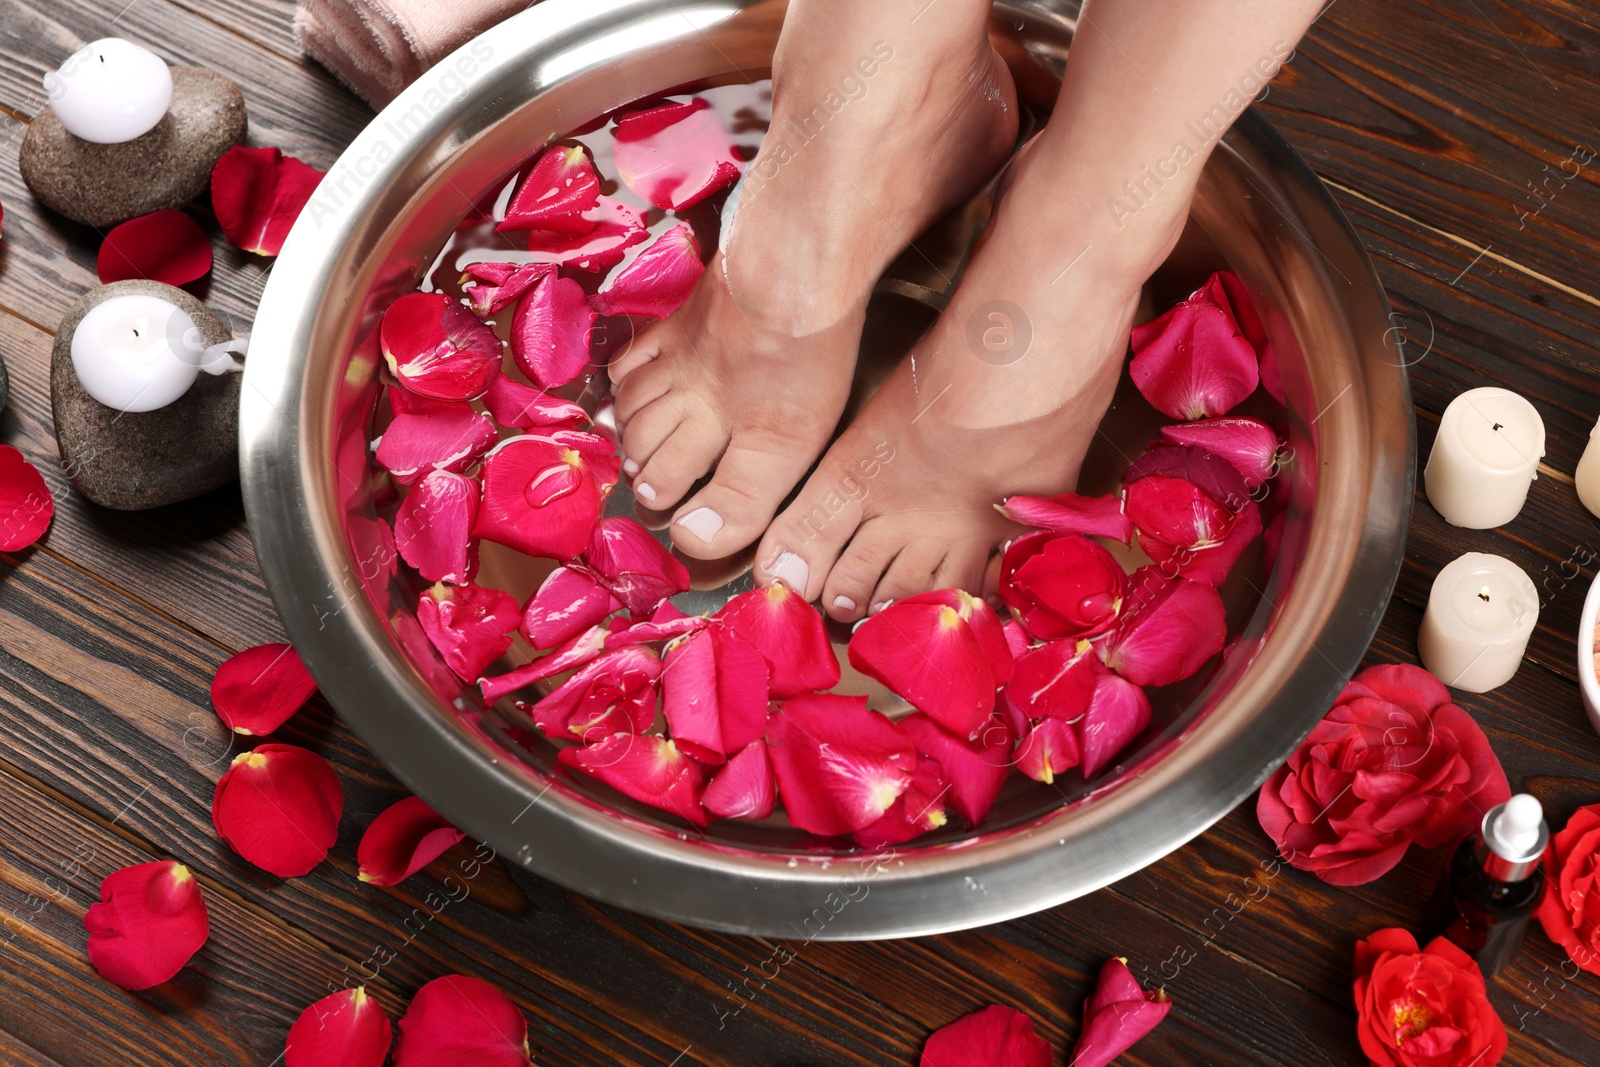 Photo of Woman soaking her feet in bowl with water and red rose petals on wooden floor, closeup. Pedicure procedure